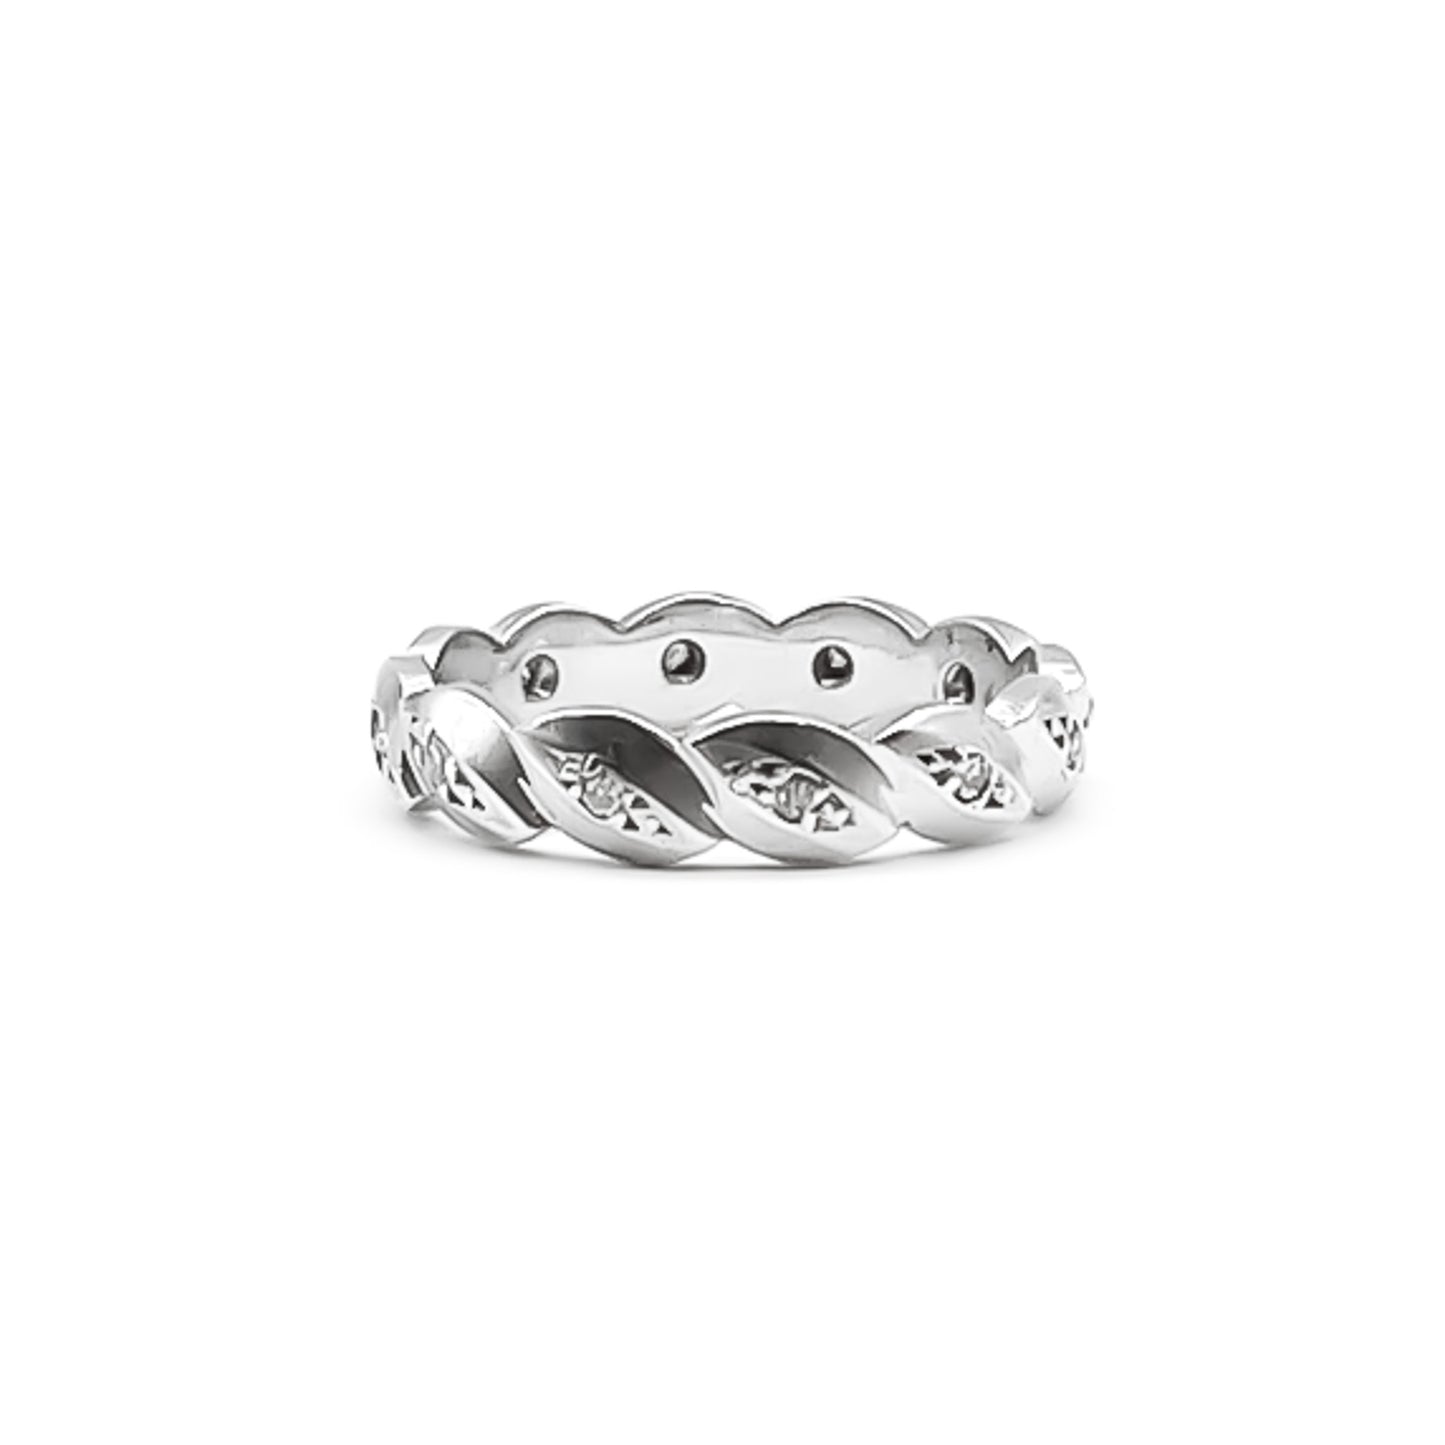 Dainty 18ct white gold eternity ring set with twelve small diamonds.